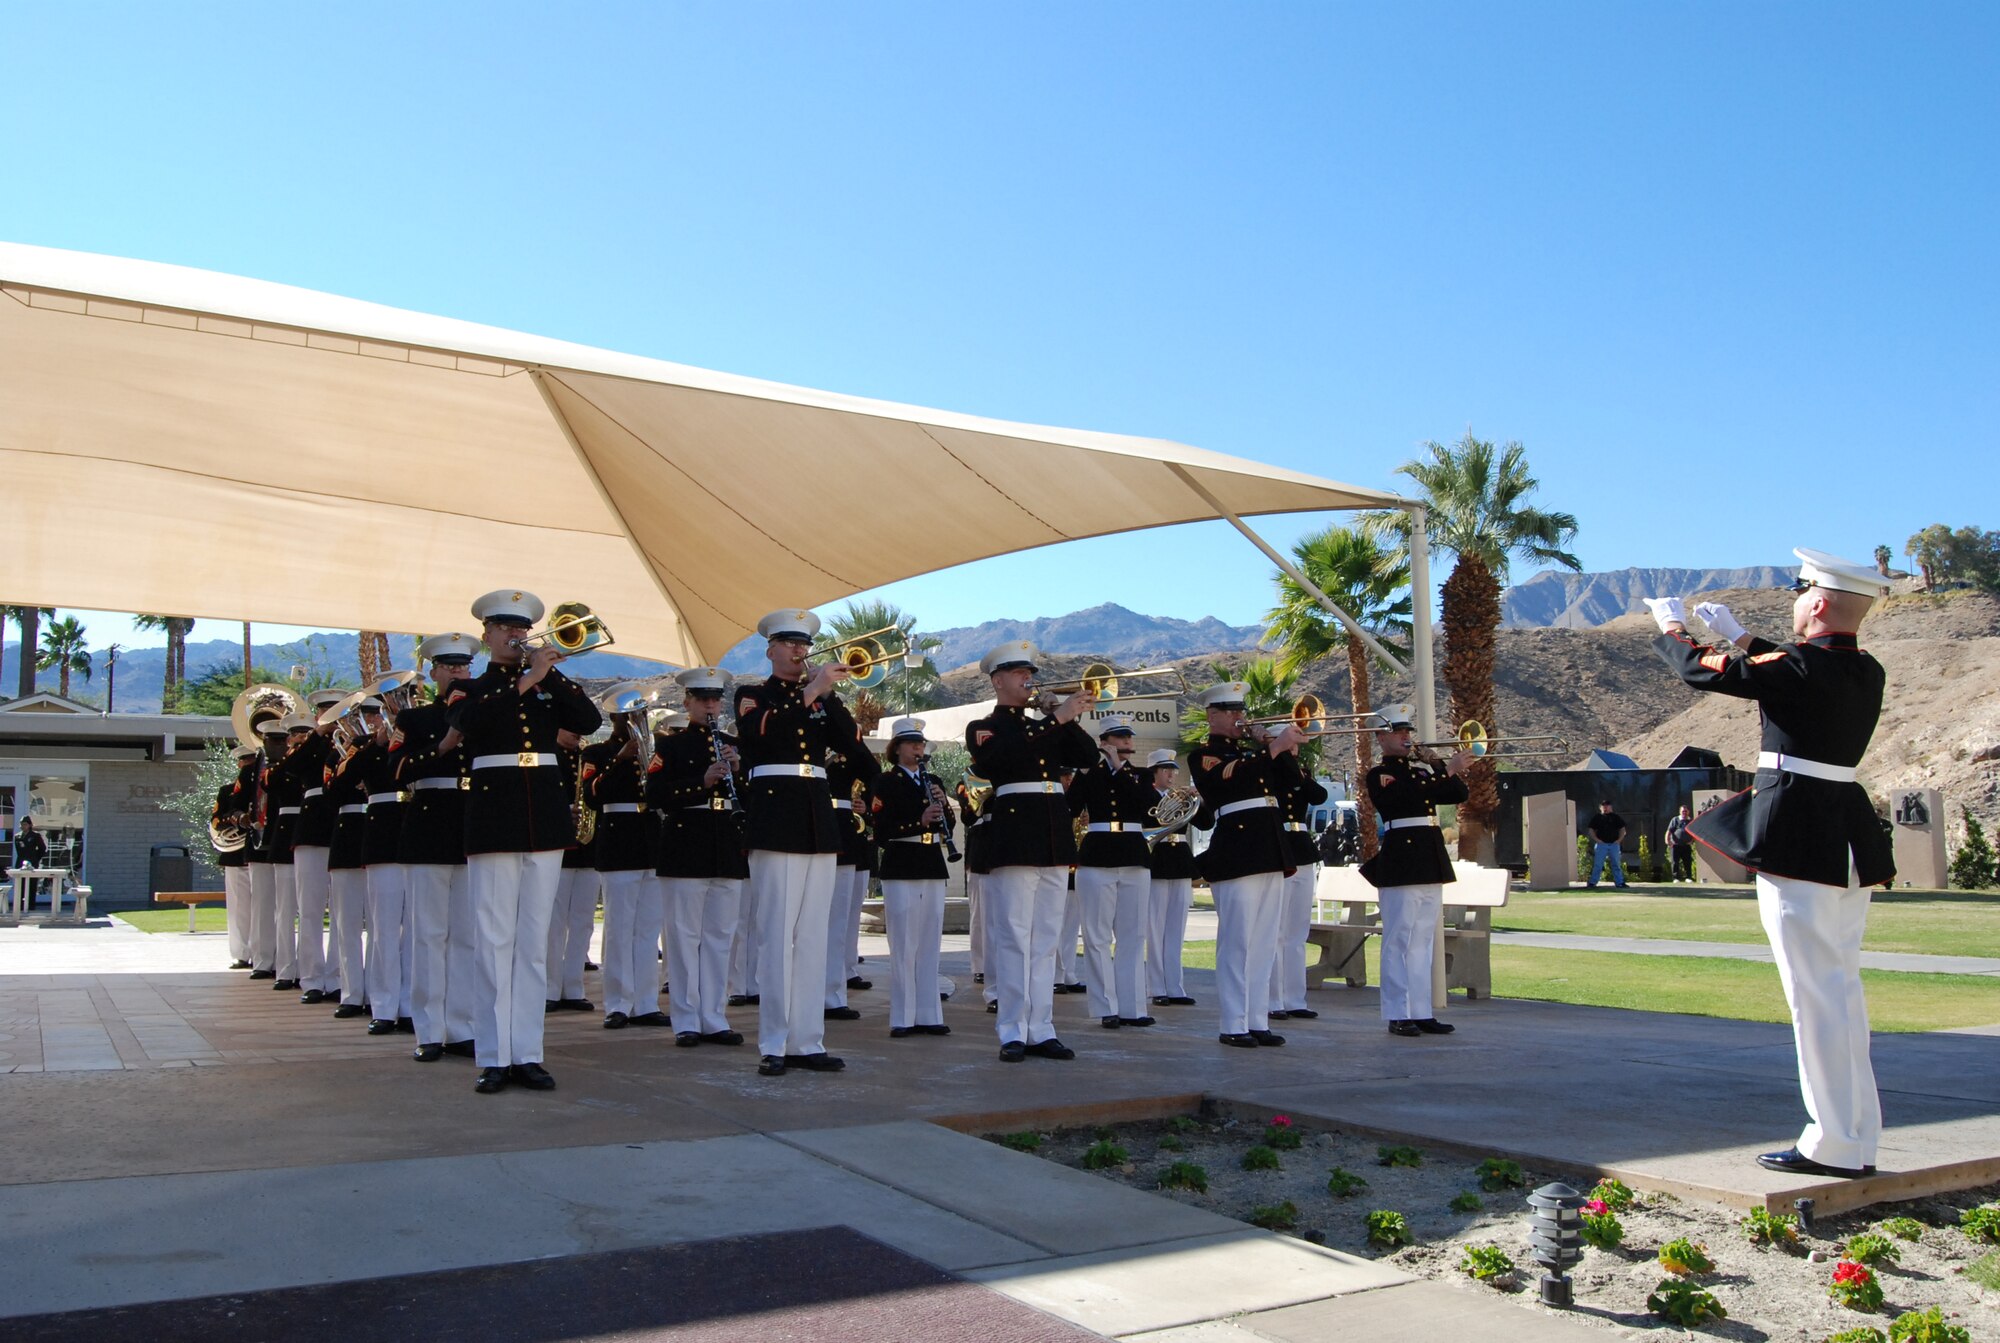 The 42-member Marine Air Ground Combat Center Band, from Twentynine Palms, California, rehearses "Ruffles and Flourishes" Dec. 29 at St. Margaret's Episcopal Church in Palm Desert, California, prior to the arrival of the former President Gerald R. Ford's remains. More than 500 military members are in Palm Desert supporting the California portion of the State Funeral for former president. The military is providing ceremonial, logistics, and security support to honor and pay tribute to the former Commander-in-Chief and the Ford family. Ford died in Palm Desert, California, Dec. 26 at the age of 93. (U.S. Air Force Photo/1st Lt Carrie L. Kessler)